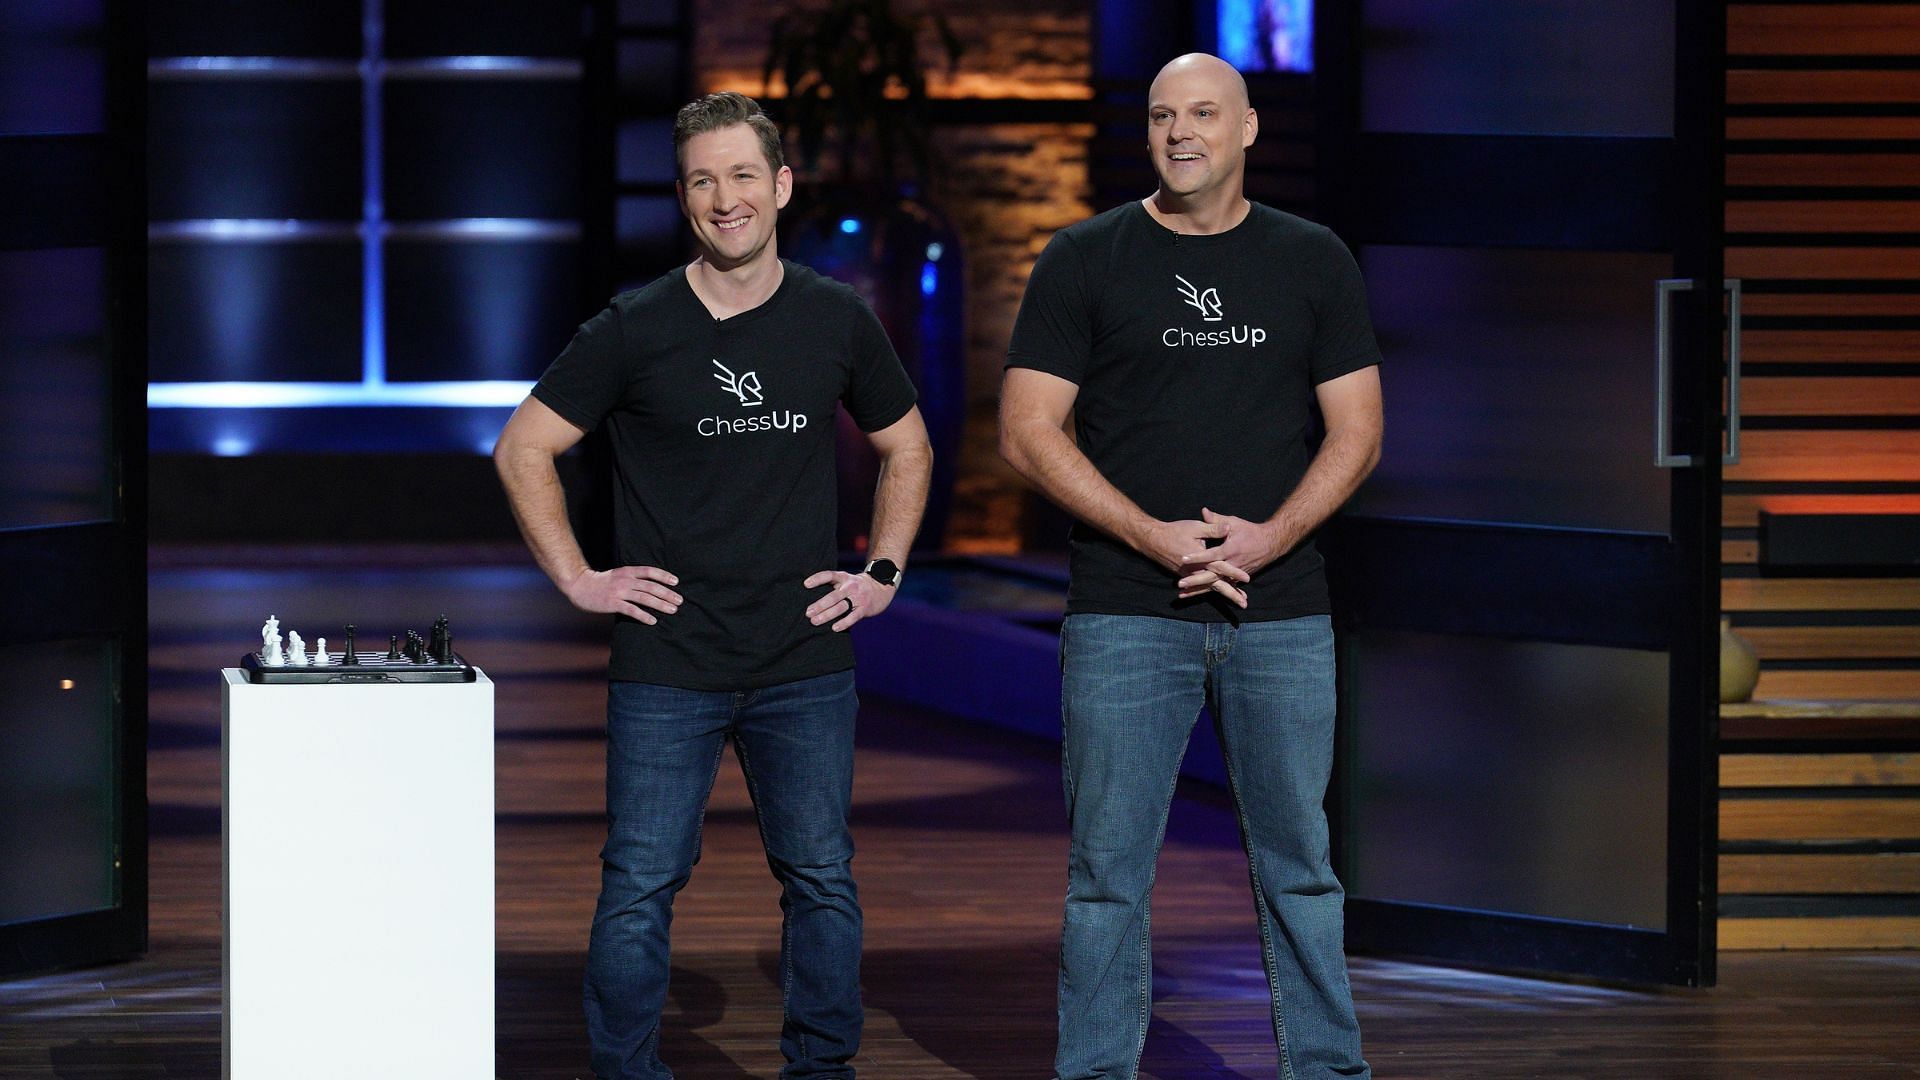 The founders of ChessUp at the Shark Tank set (Image via ABC/@Christopher Willard)